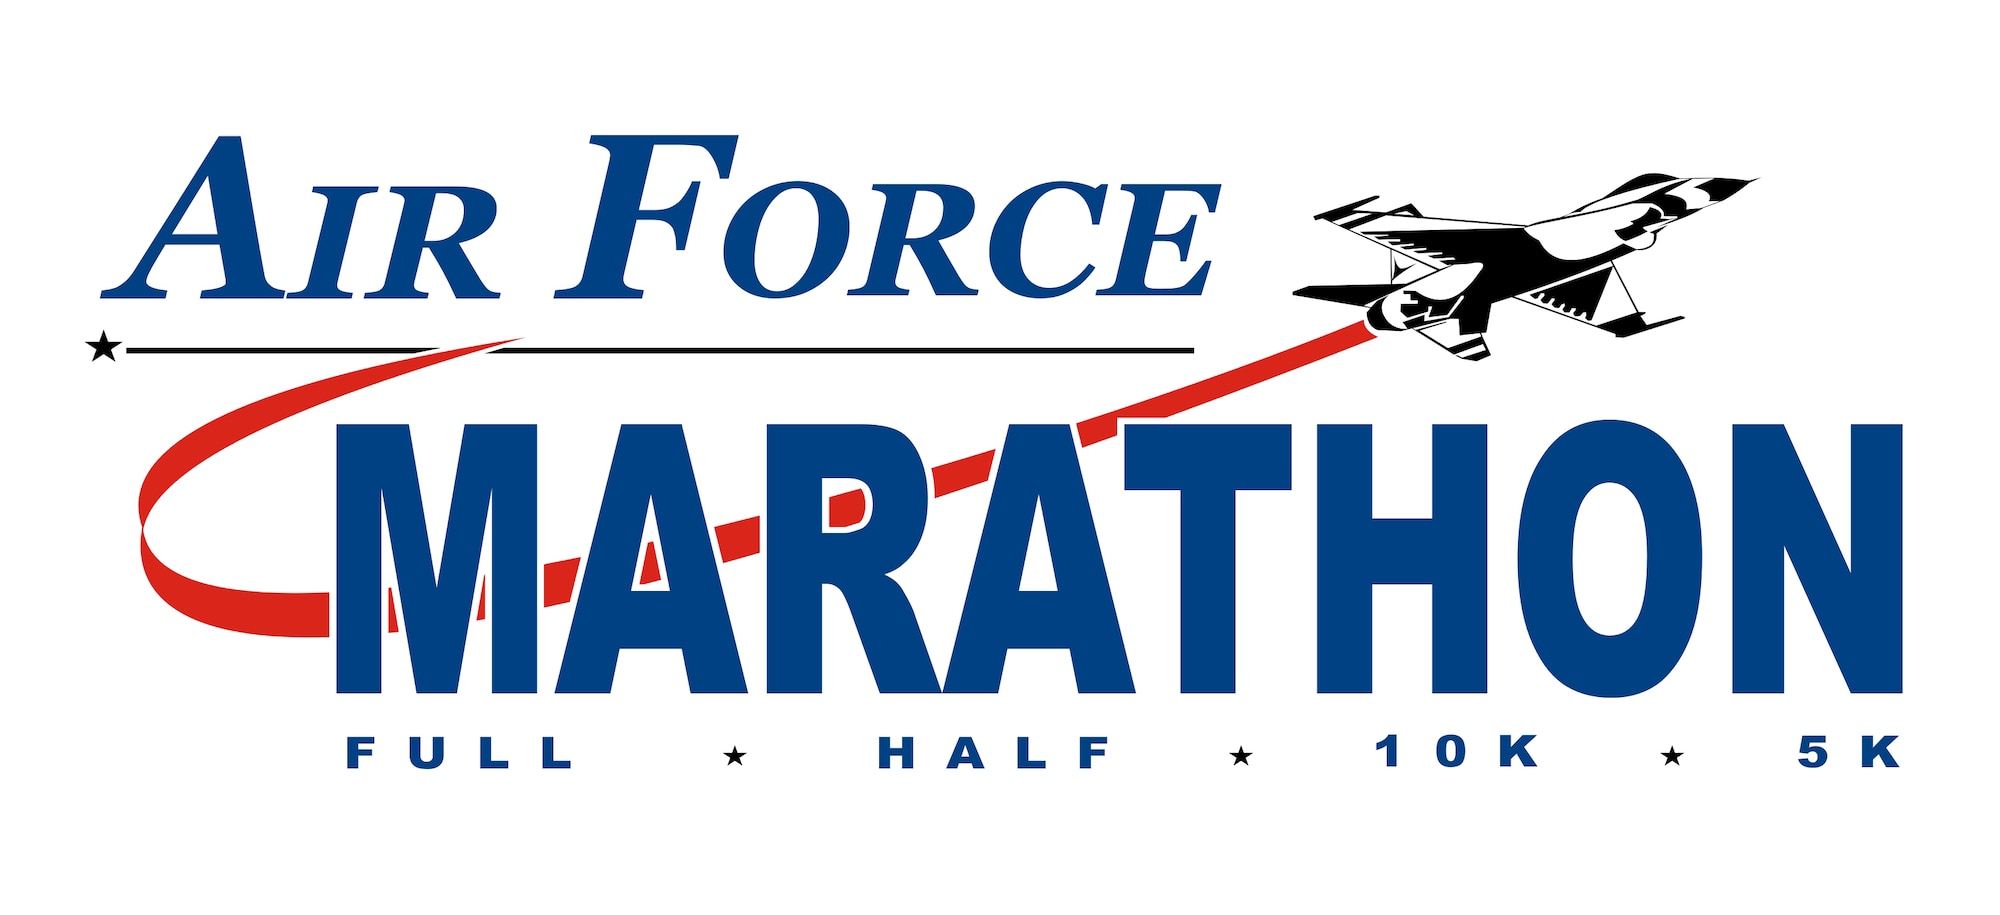 Registration for the 2014 Air Force marathon begins at midnight on Jan. 1, 2014.